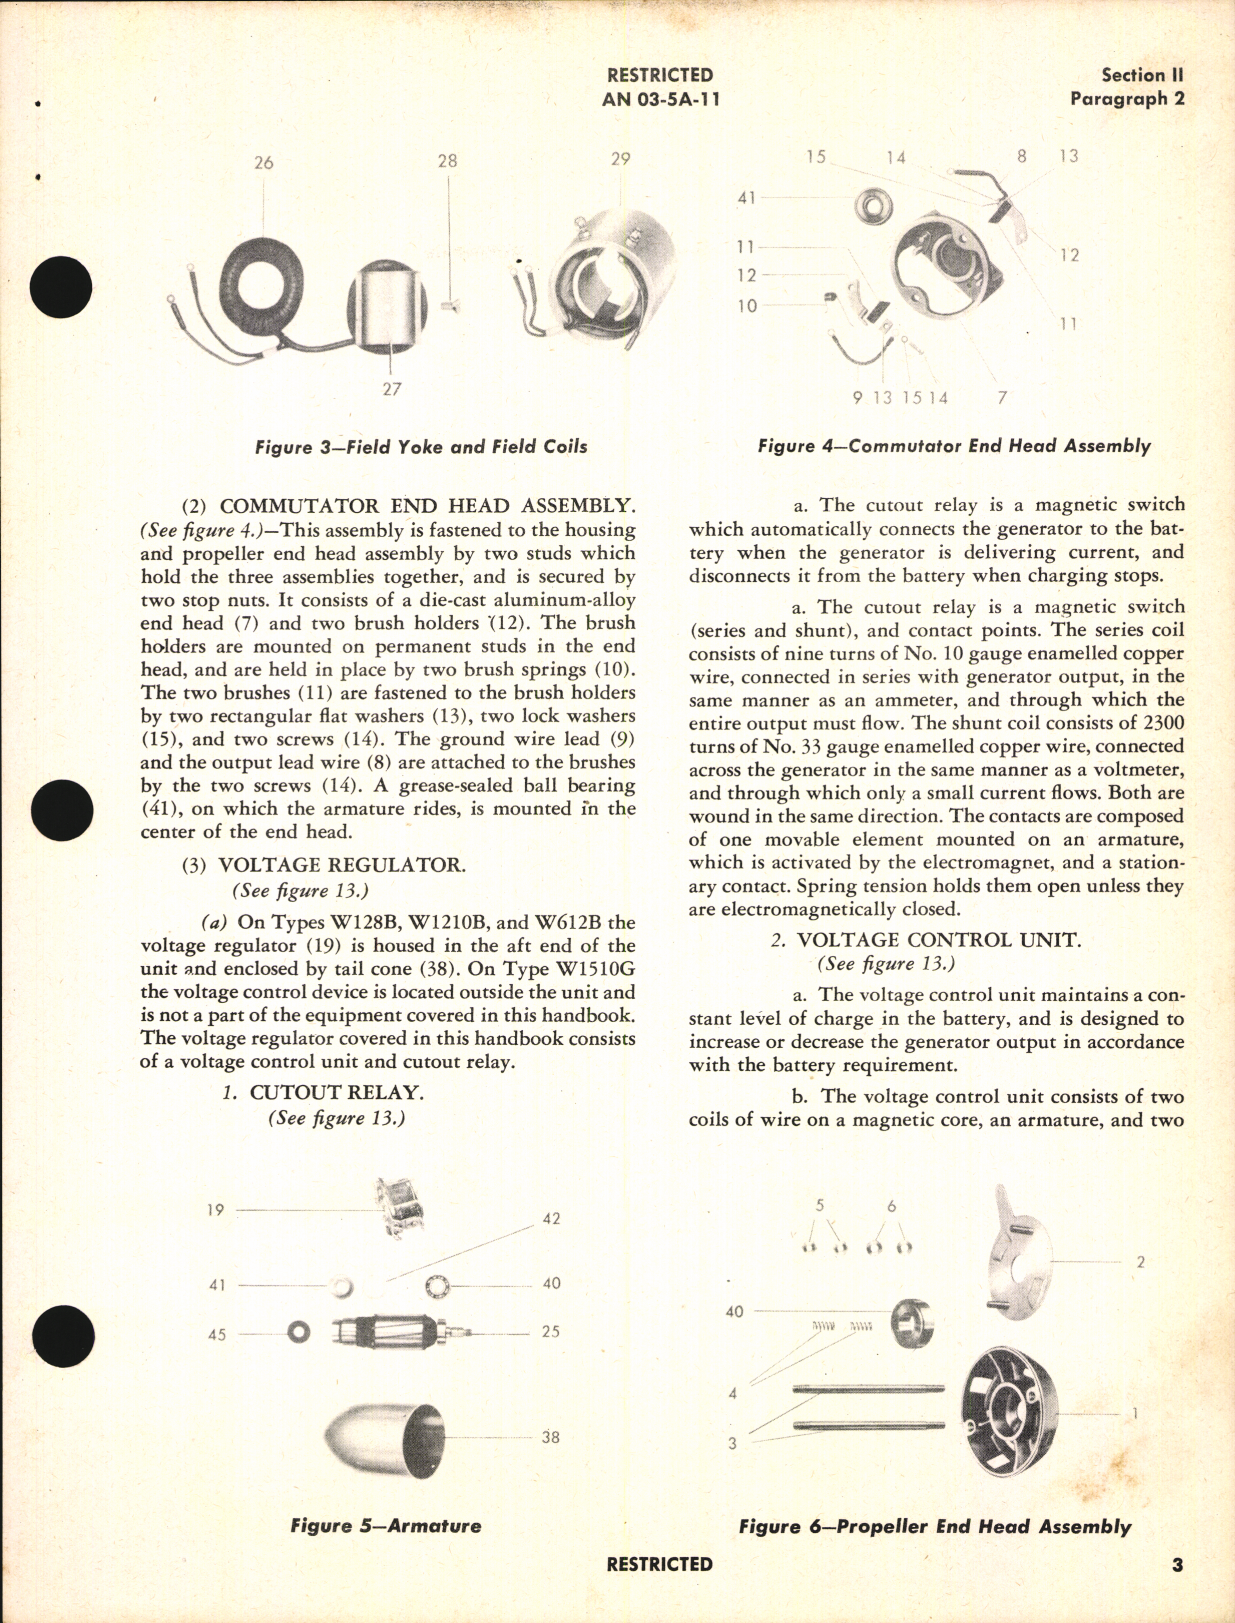 Sample page 7 from AirCorps Library document: Handbook of Instructions with Parts Catalog for Wind Driven Aircraft Generators